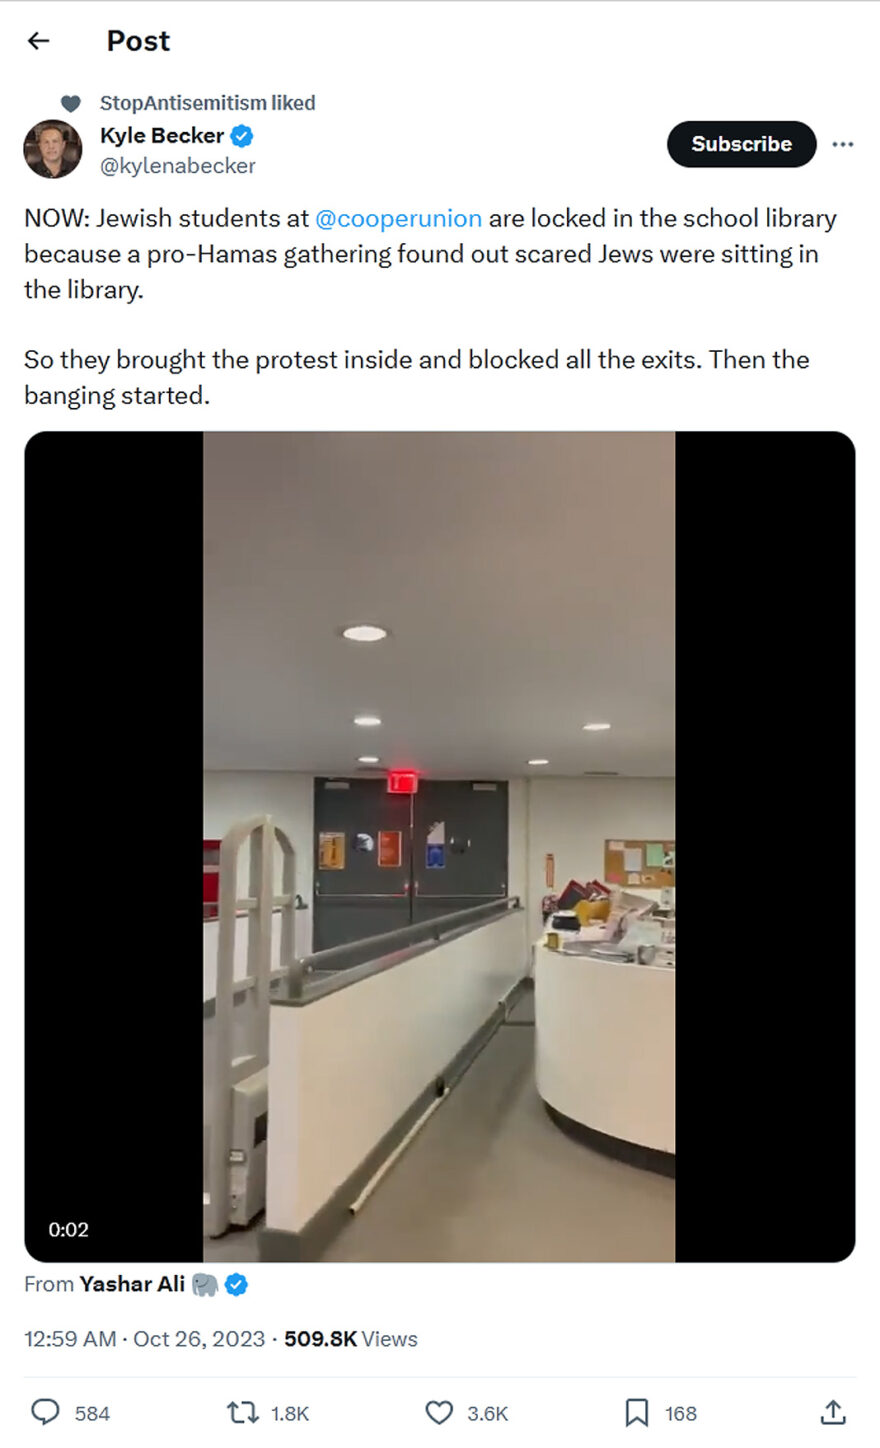 Kyle Becker-tweet-25October2023-Jewish students at cooperunion are locked in the school library